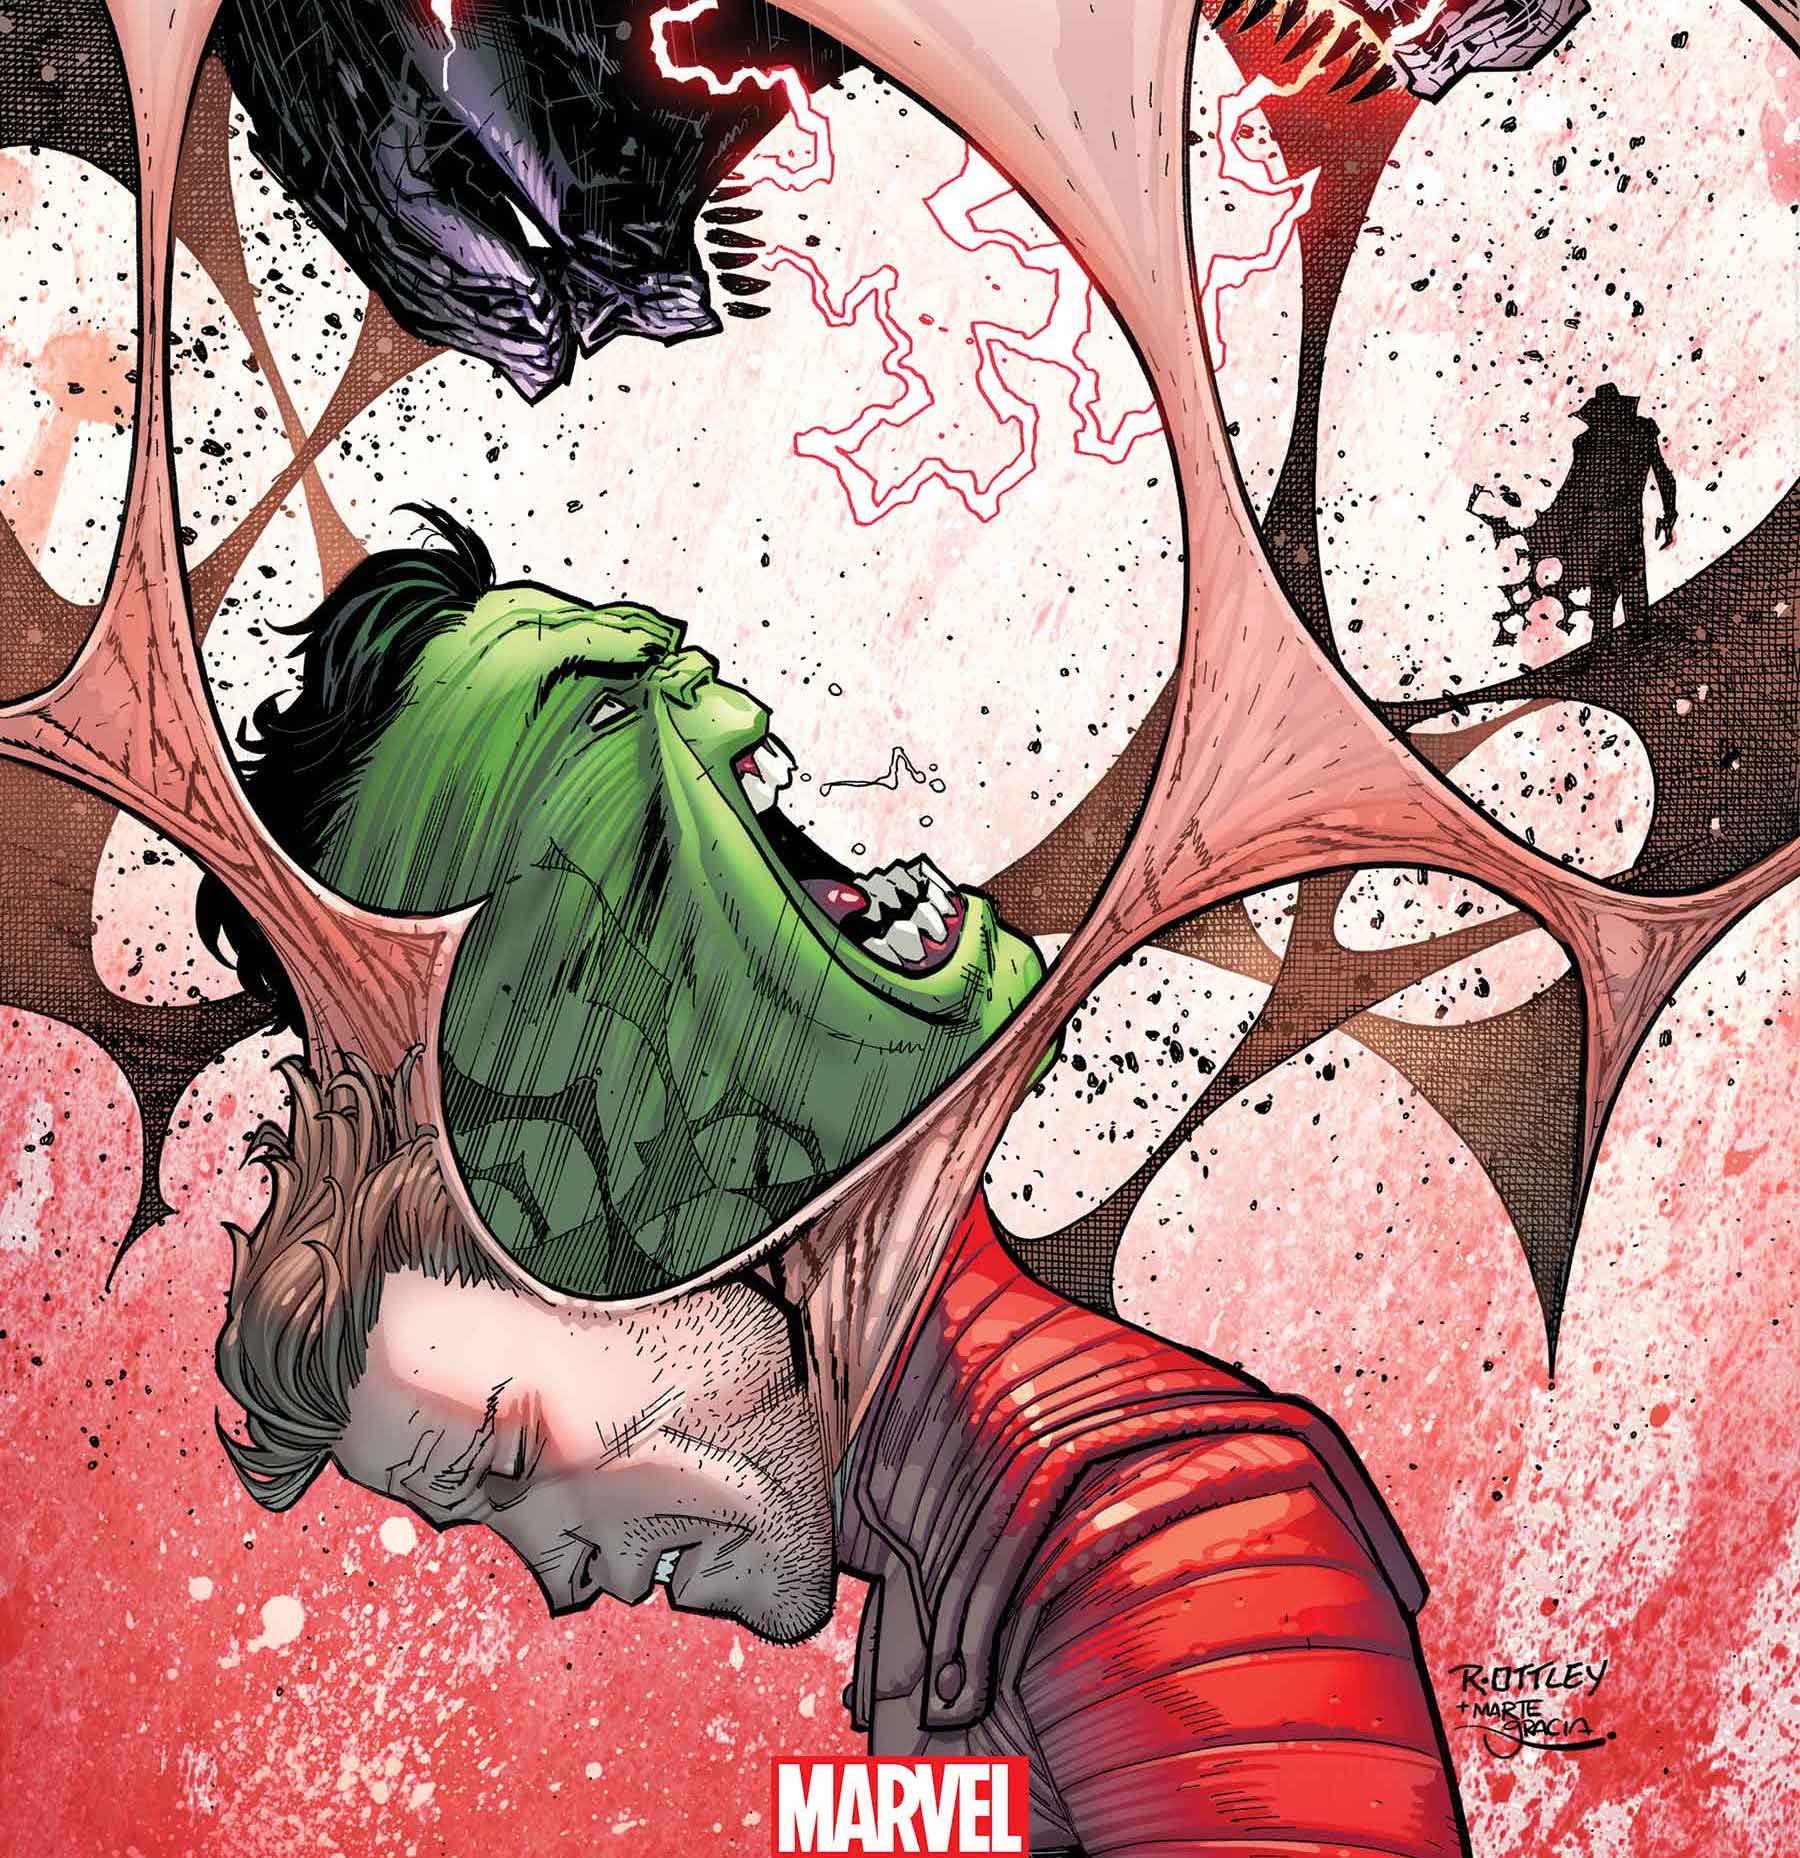 'Hulk' #14 serves as finale to Donny Cates and Ryan Ottley's run